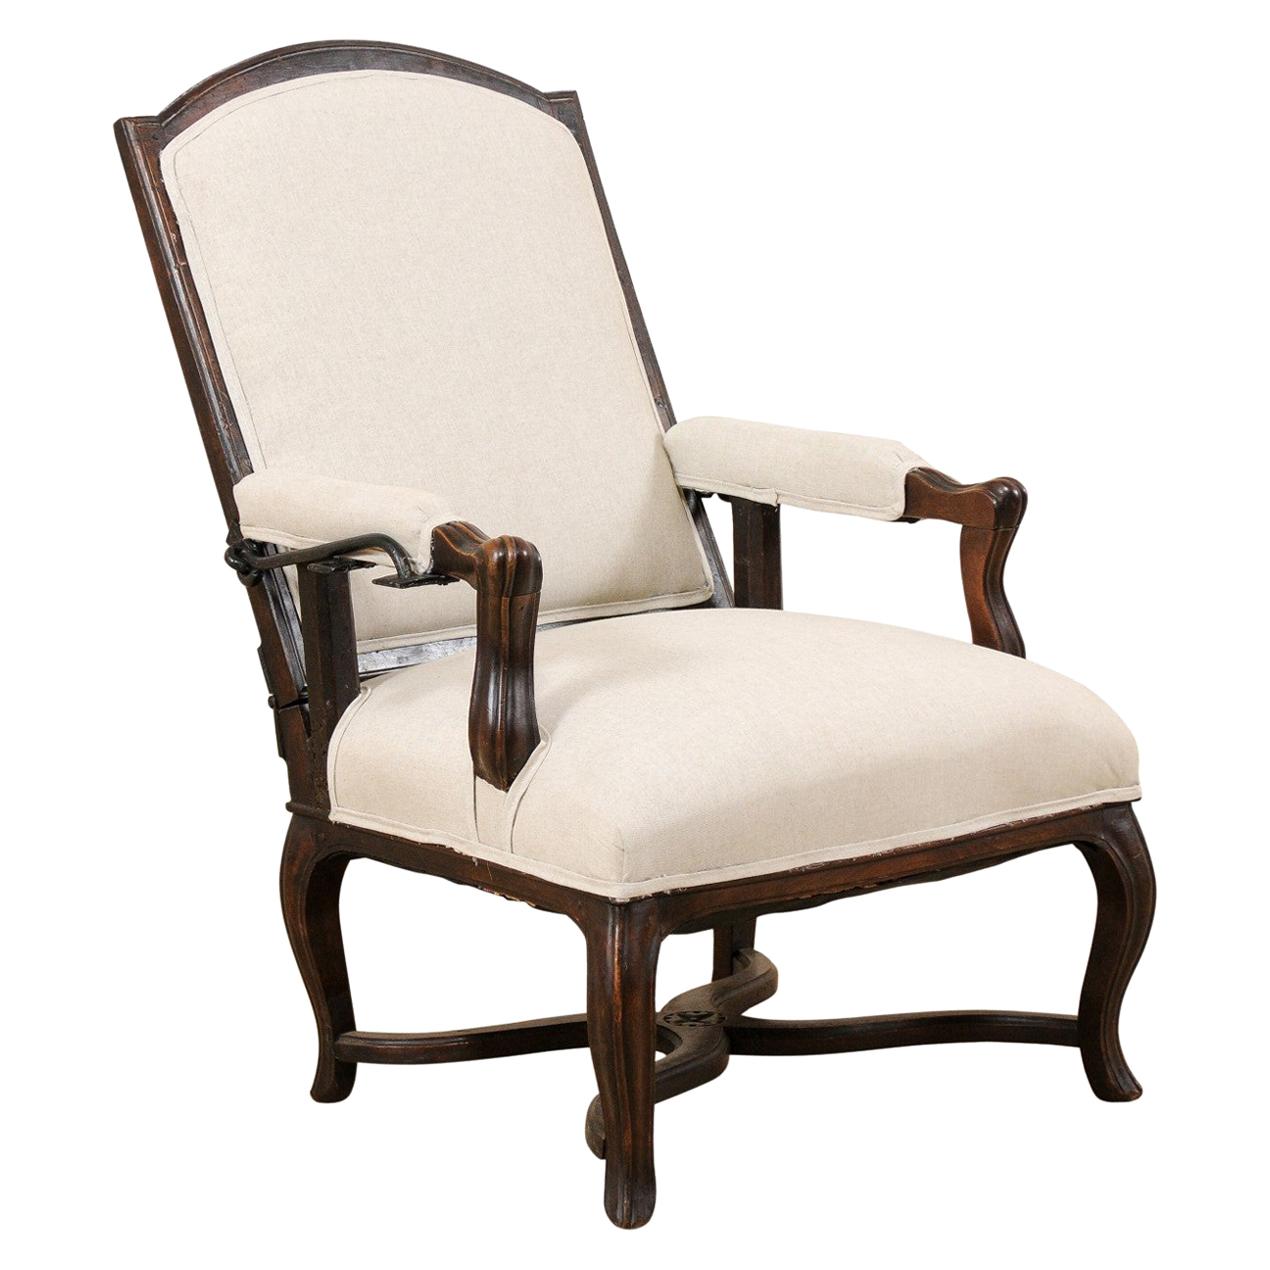 Italian 19th Century Reclining Wood and Upholstered Armchair